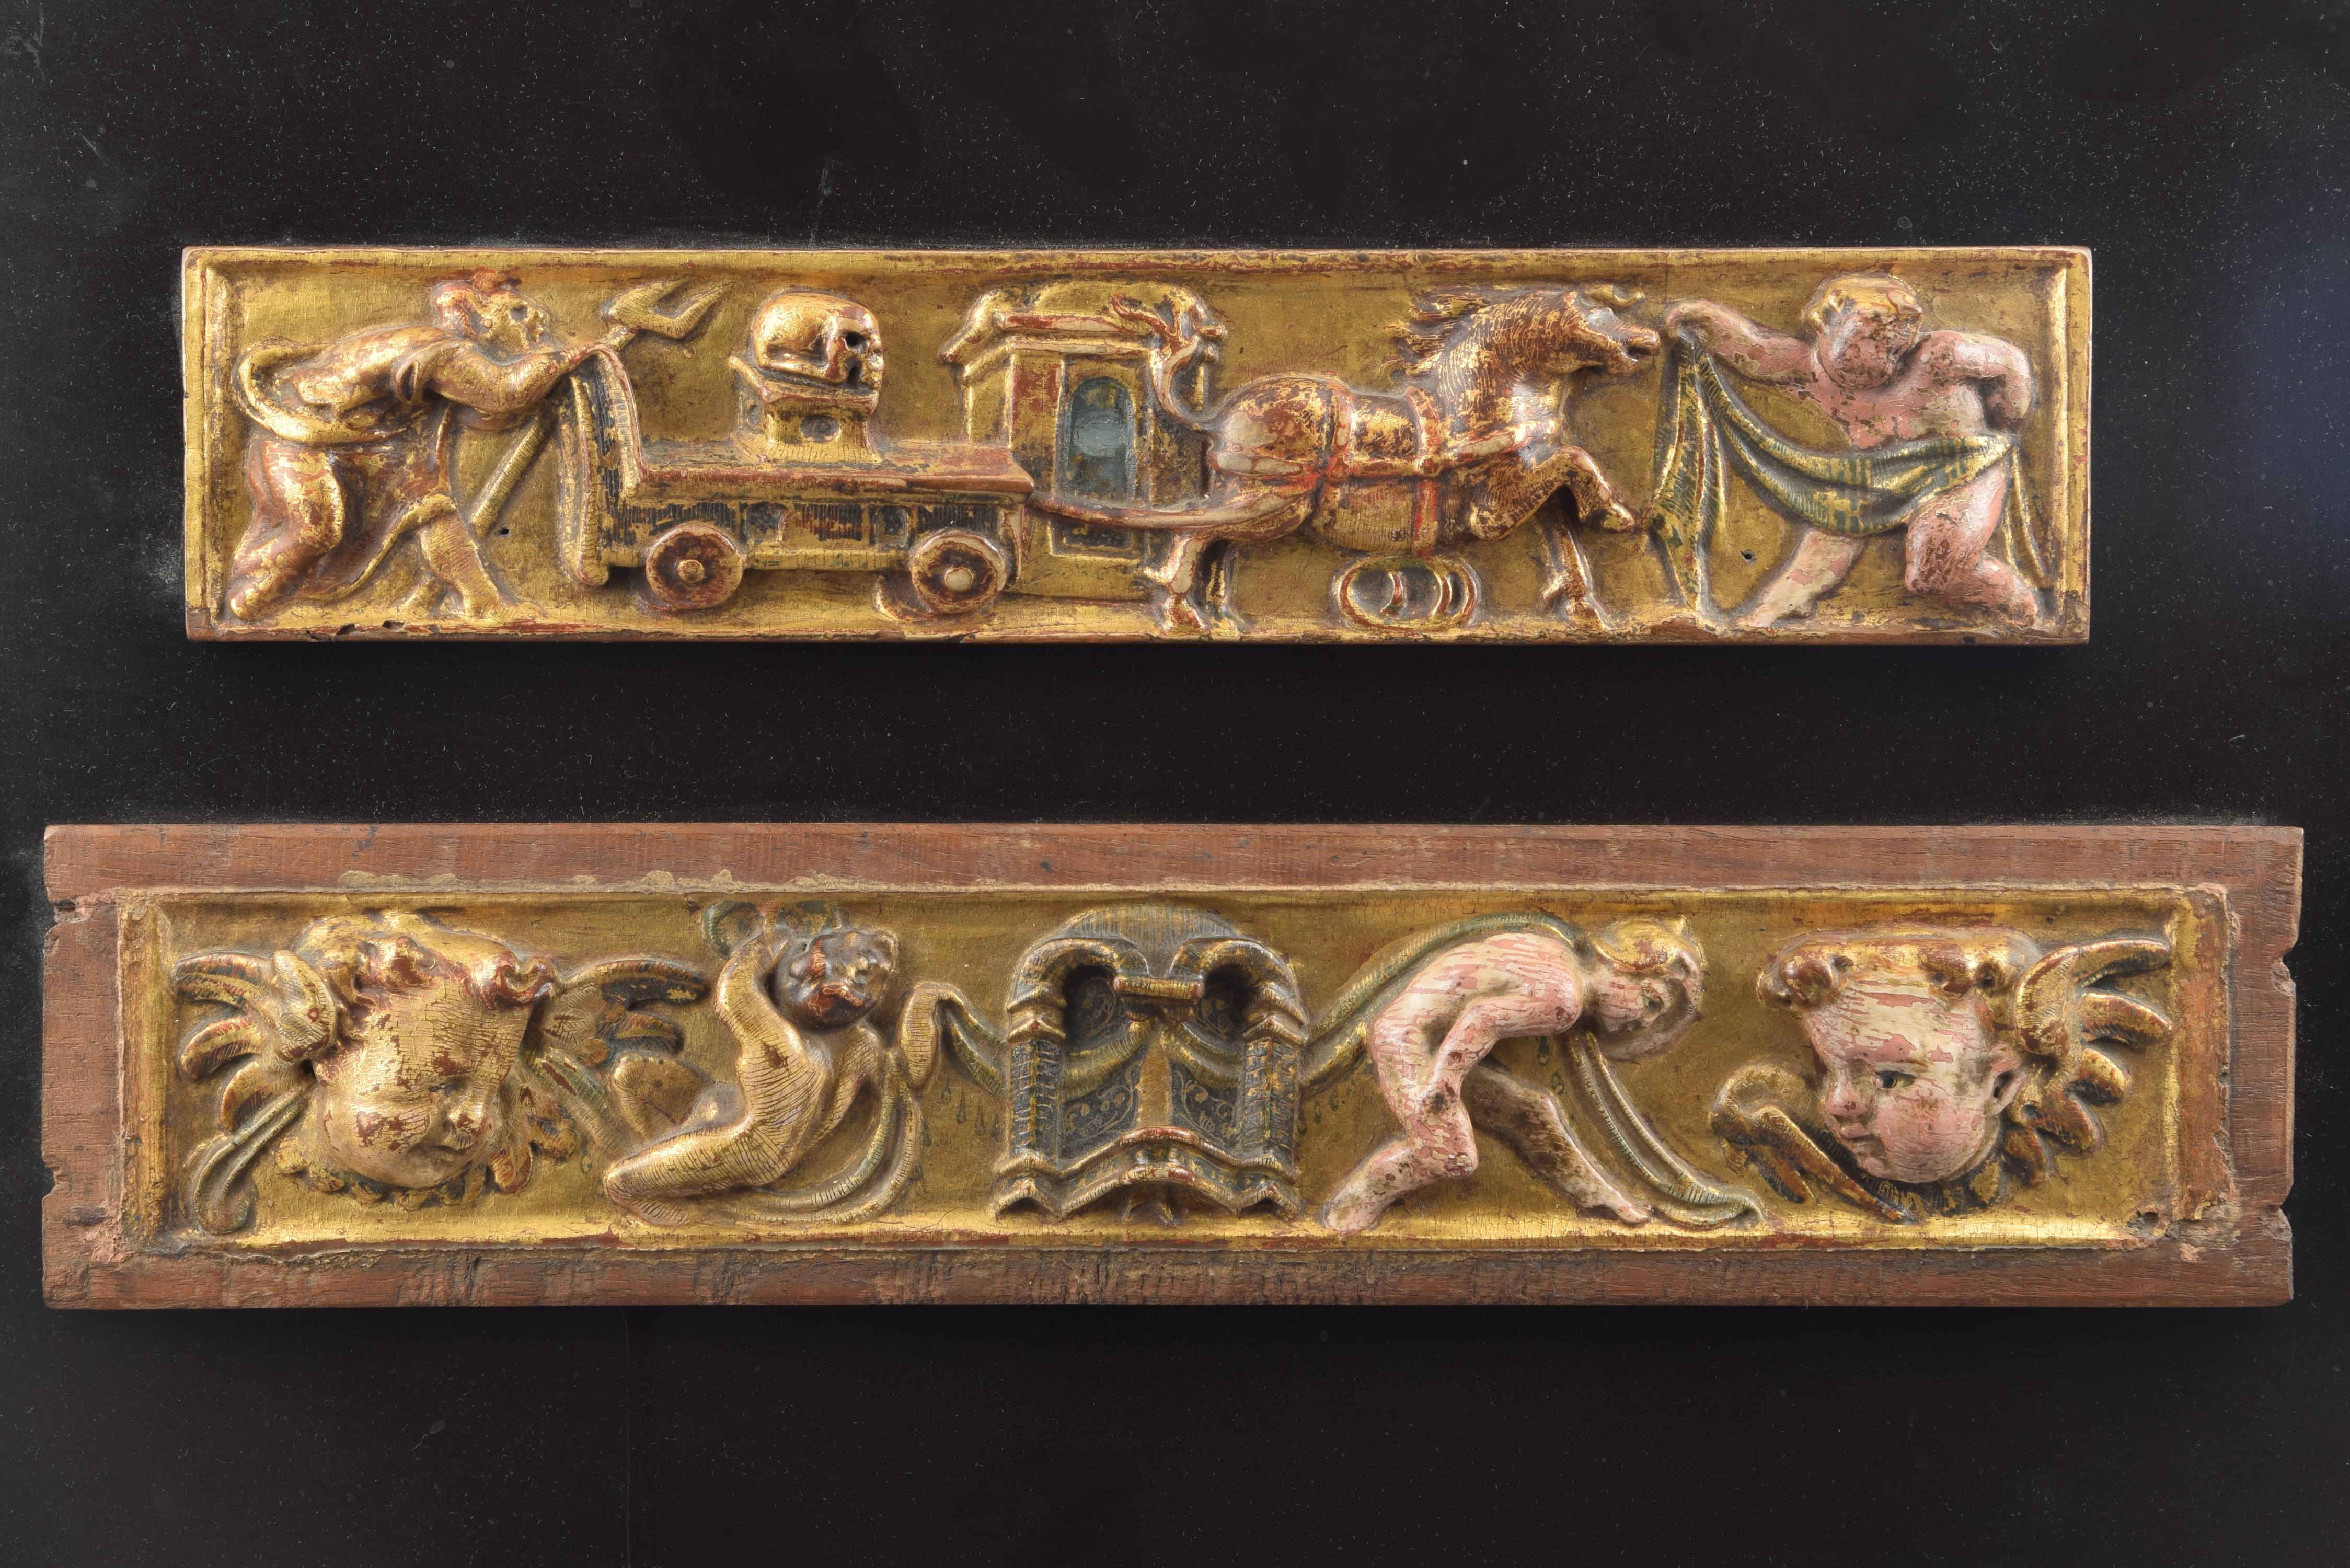 Pair of reliefs; scene with carriage with skull and scene with portico from the 16th century. Gilded and polychrome wood. Castilian school, 16th century.
 Pair of rectangular carved, gilded and polychrome wooden reliefs located on a dark back